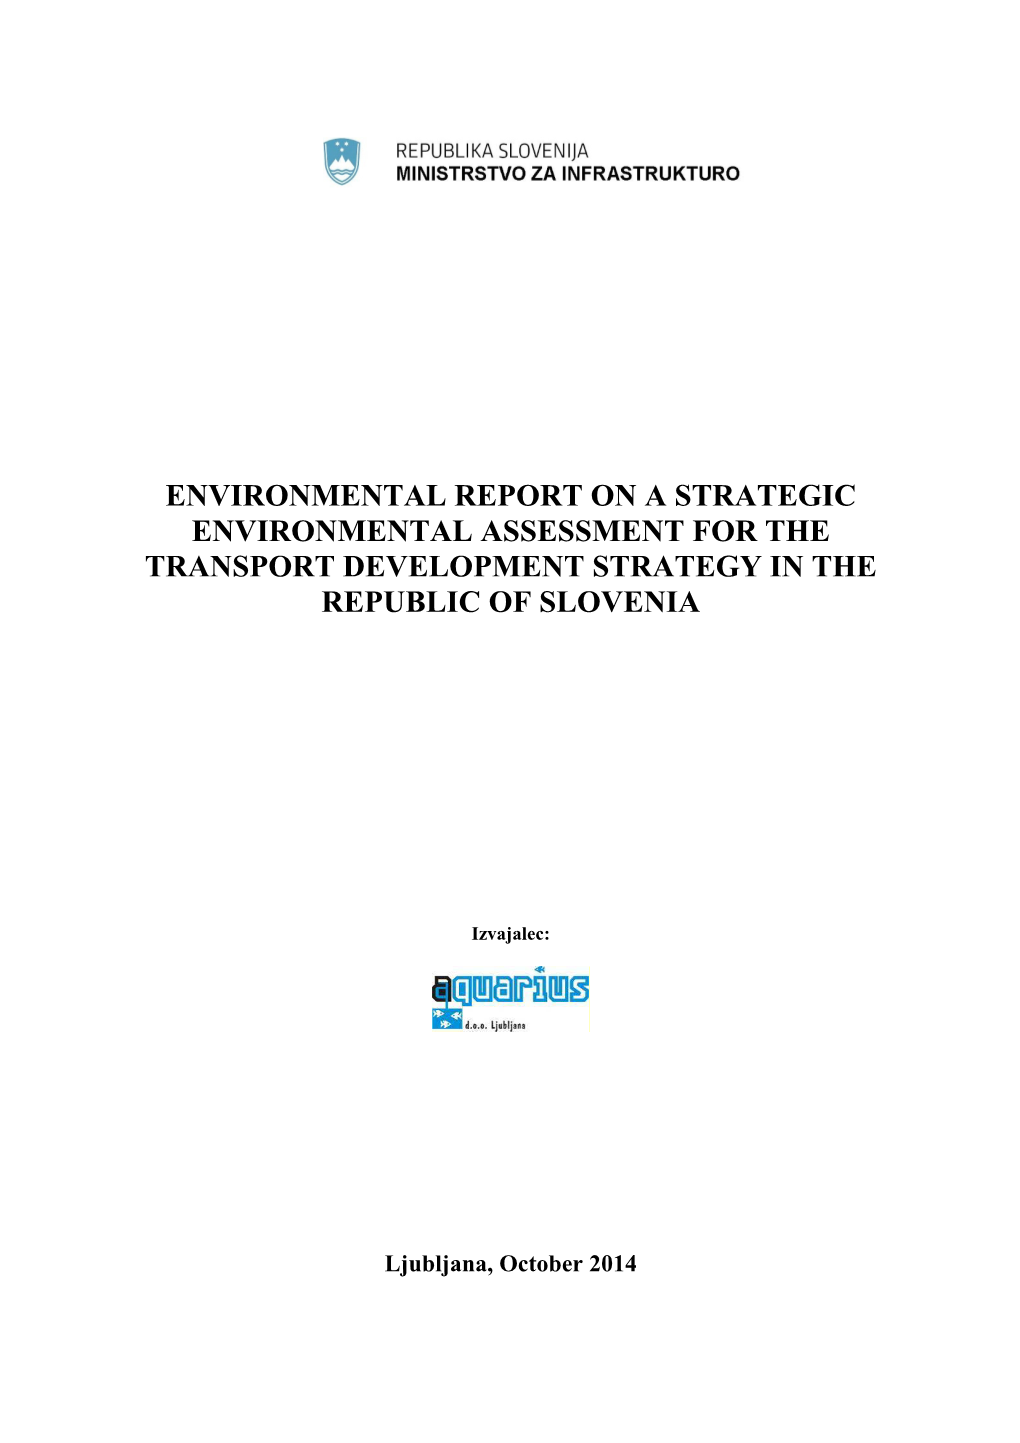 Environmental Report on a Strategic Environmental Assessment for the Transport Development Strategy in the Republic of Slovenia